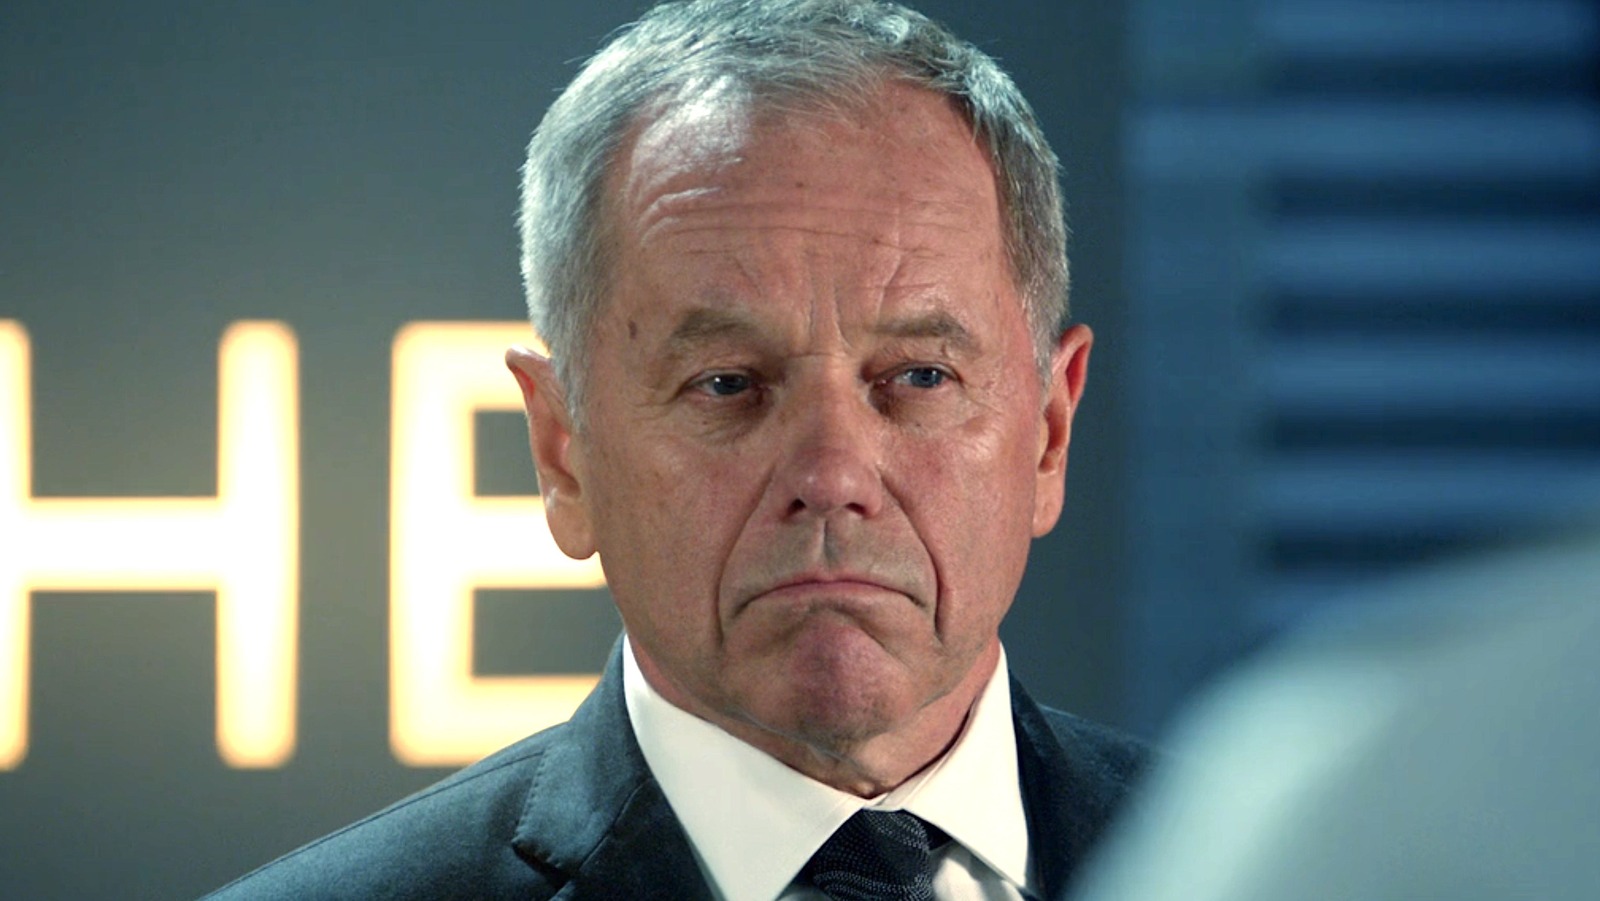 The CSI Character Everyone Forgets Wolfgang Puck Played